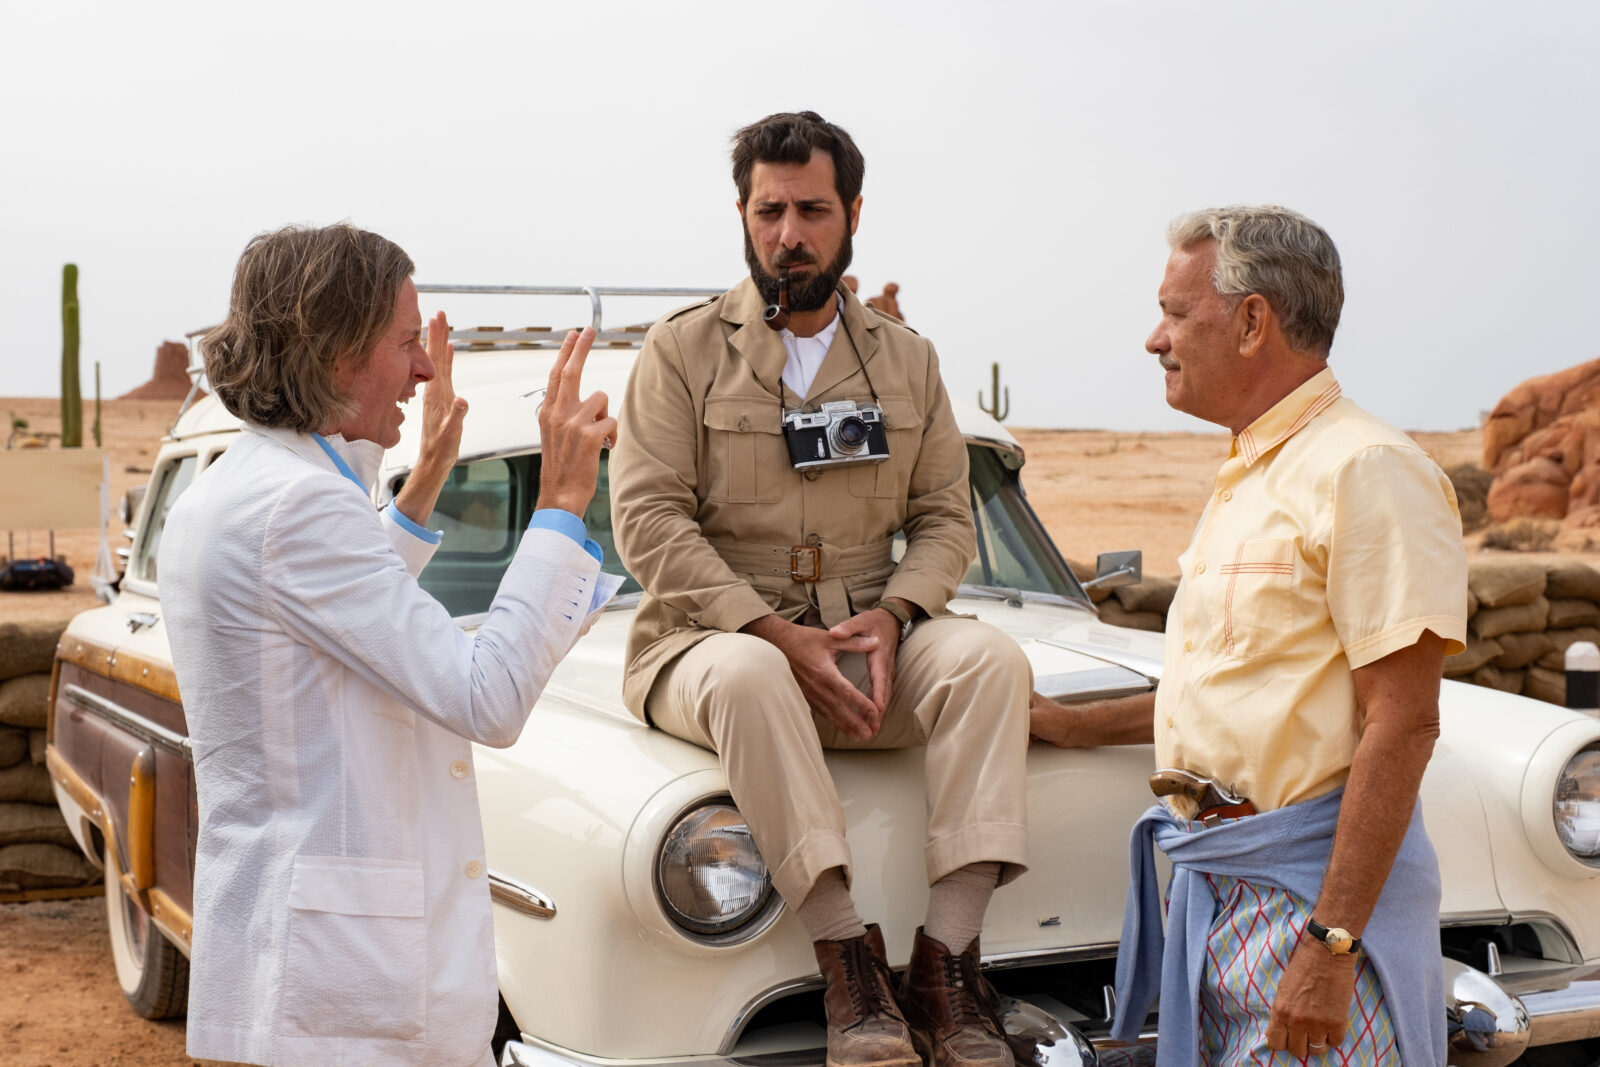 (L to R) Writer/director Wes Anderson, actor Jason Schwartzman and actor Tom Hanks on the set of ASTEROID CITY, a Focus Features release. Credit: Courtesy of Roger Do Minh/Pop. 87 Productions/Focus Features